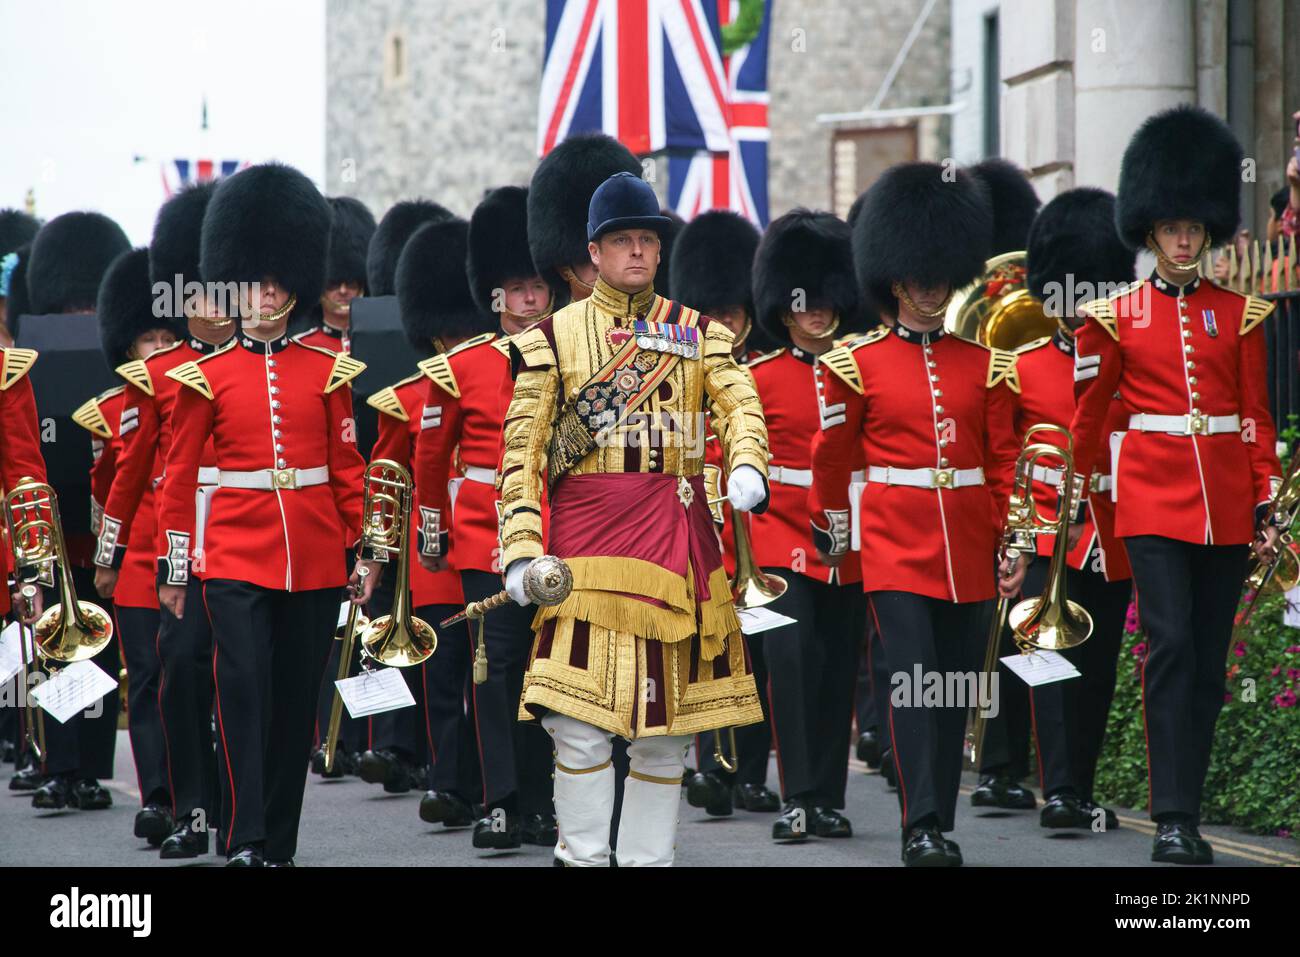 Grenadier guards, escorted by a member of the Household Cavalry, march through Windsor; late Queen Elizabeth II. Windsor Castle. Stock Photo